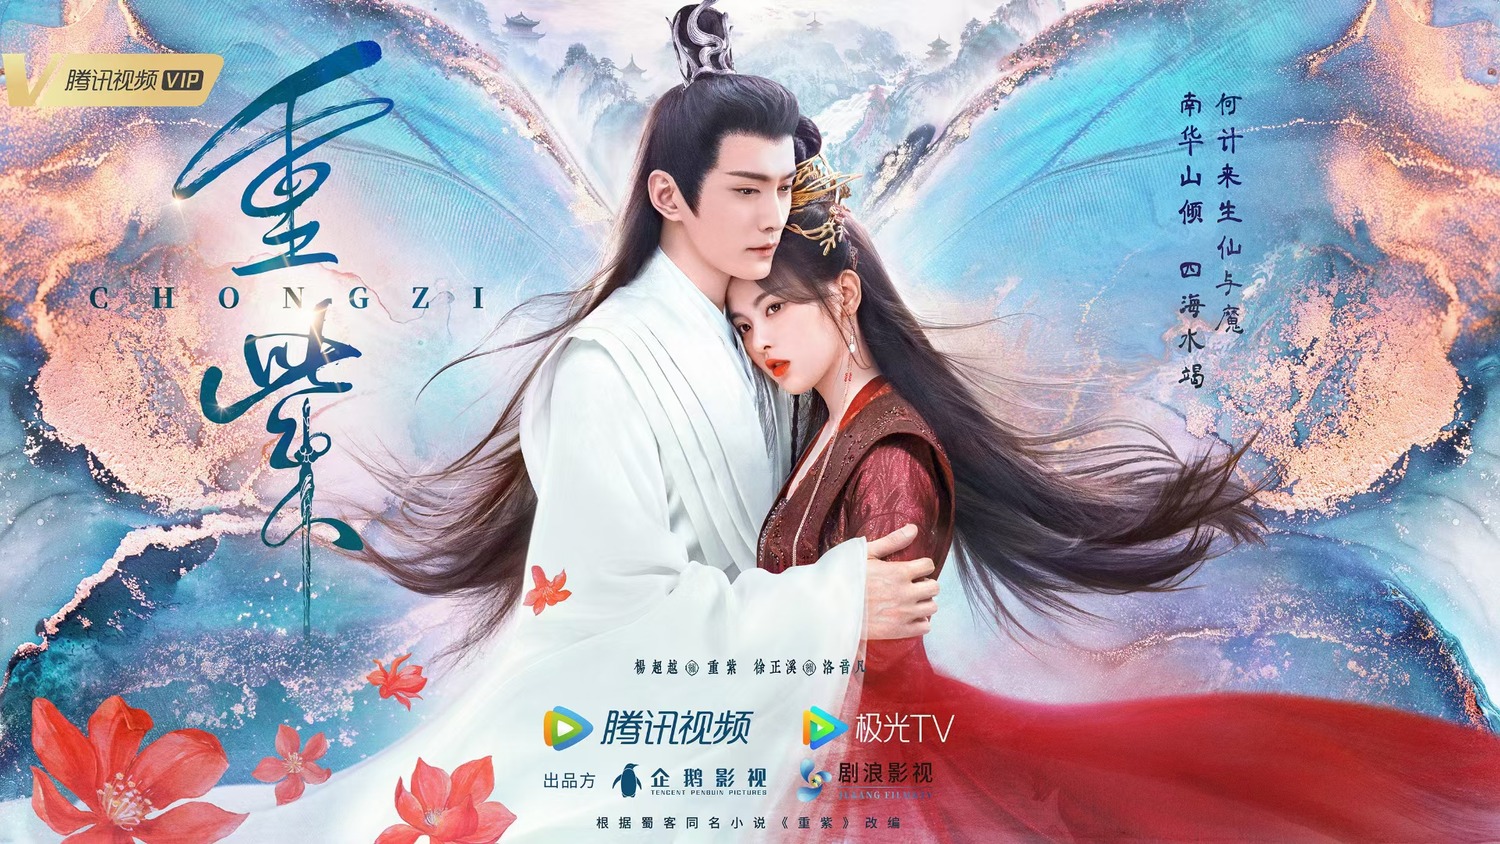 Extra Large Movie Poster Image for Chong Zi 